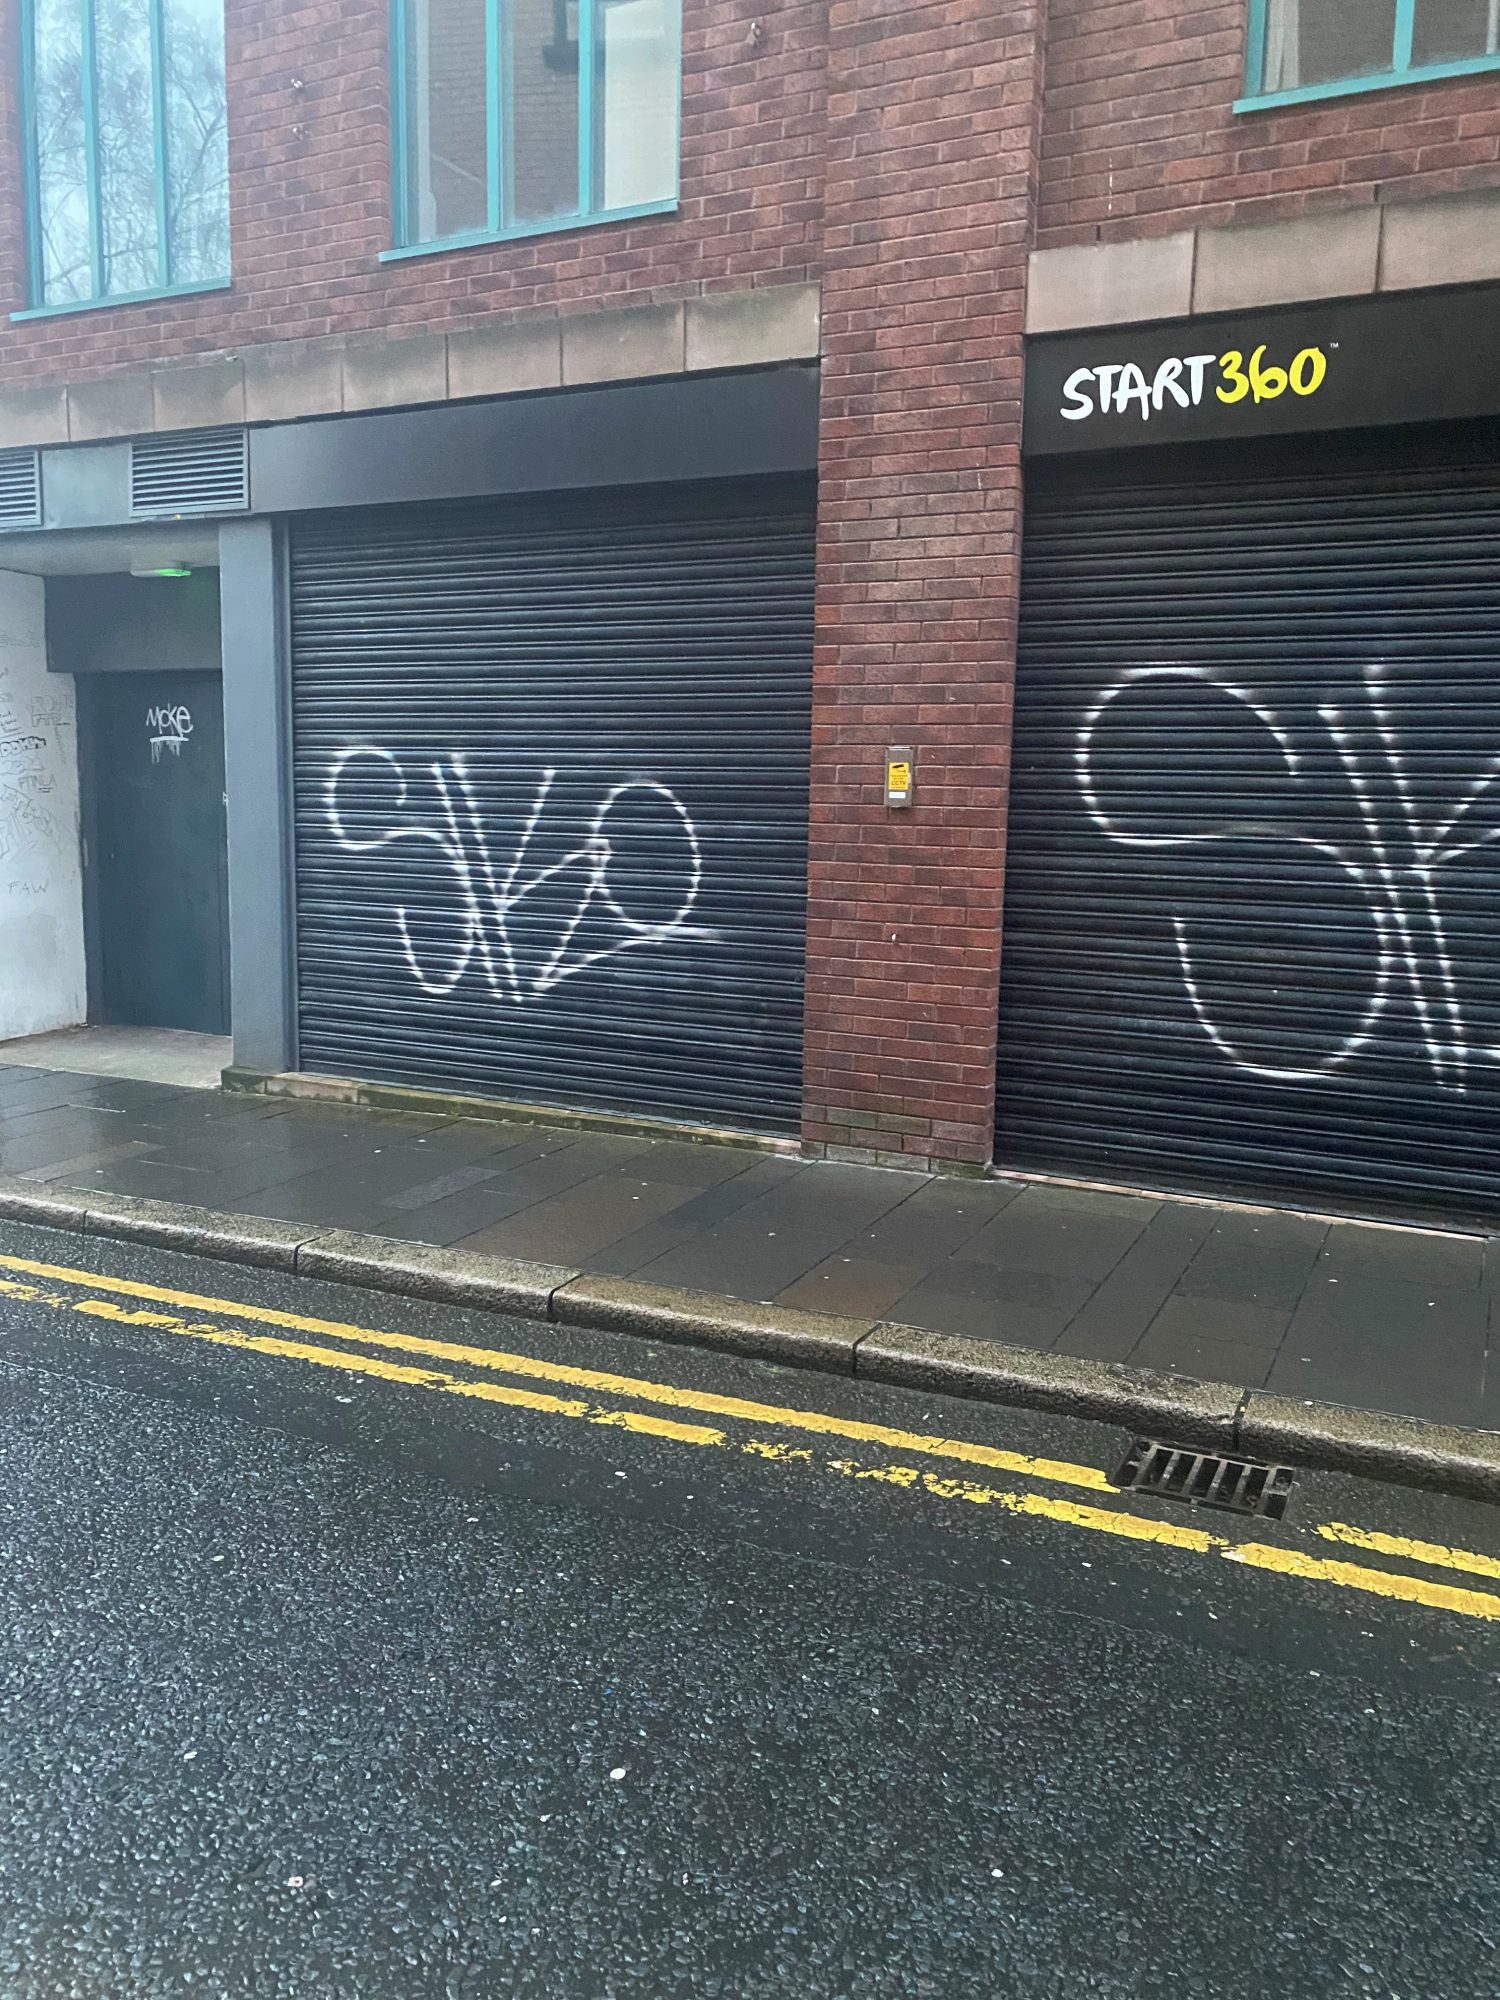 Expressions of Interest – Shutter Art Project (closed)